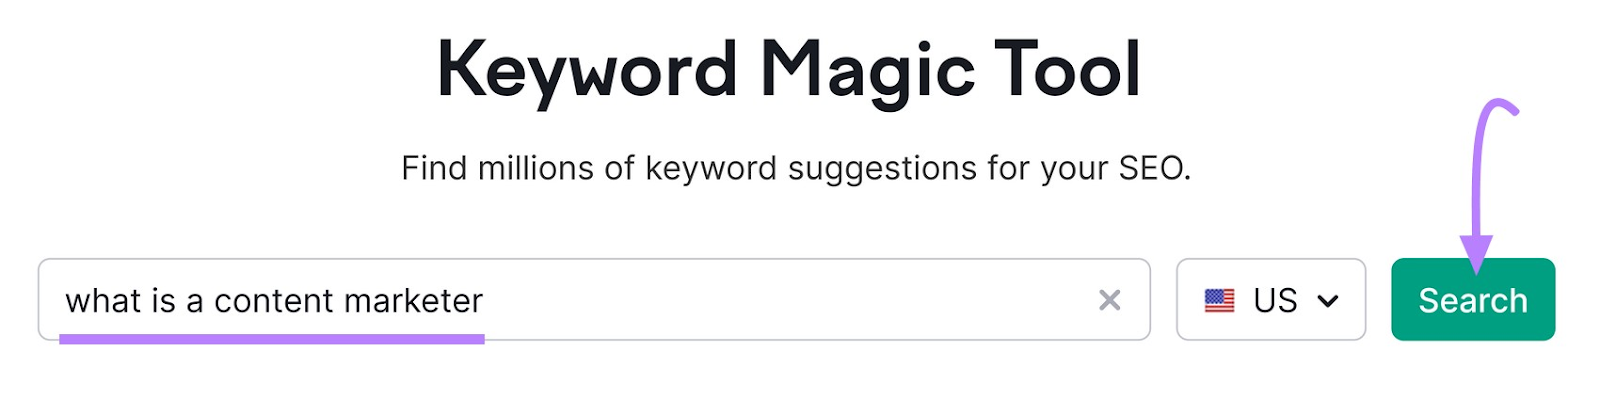 “what is a content marketer” entered in Keyword Magic Tool search bar